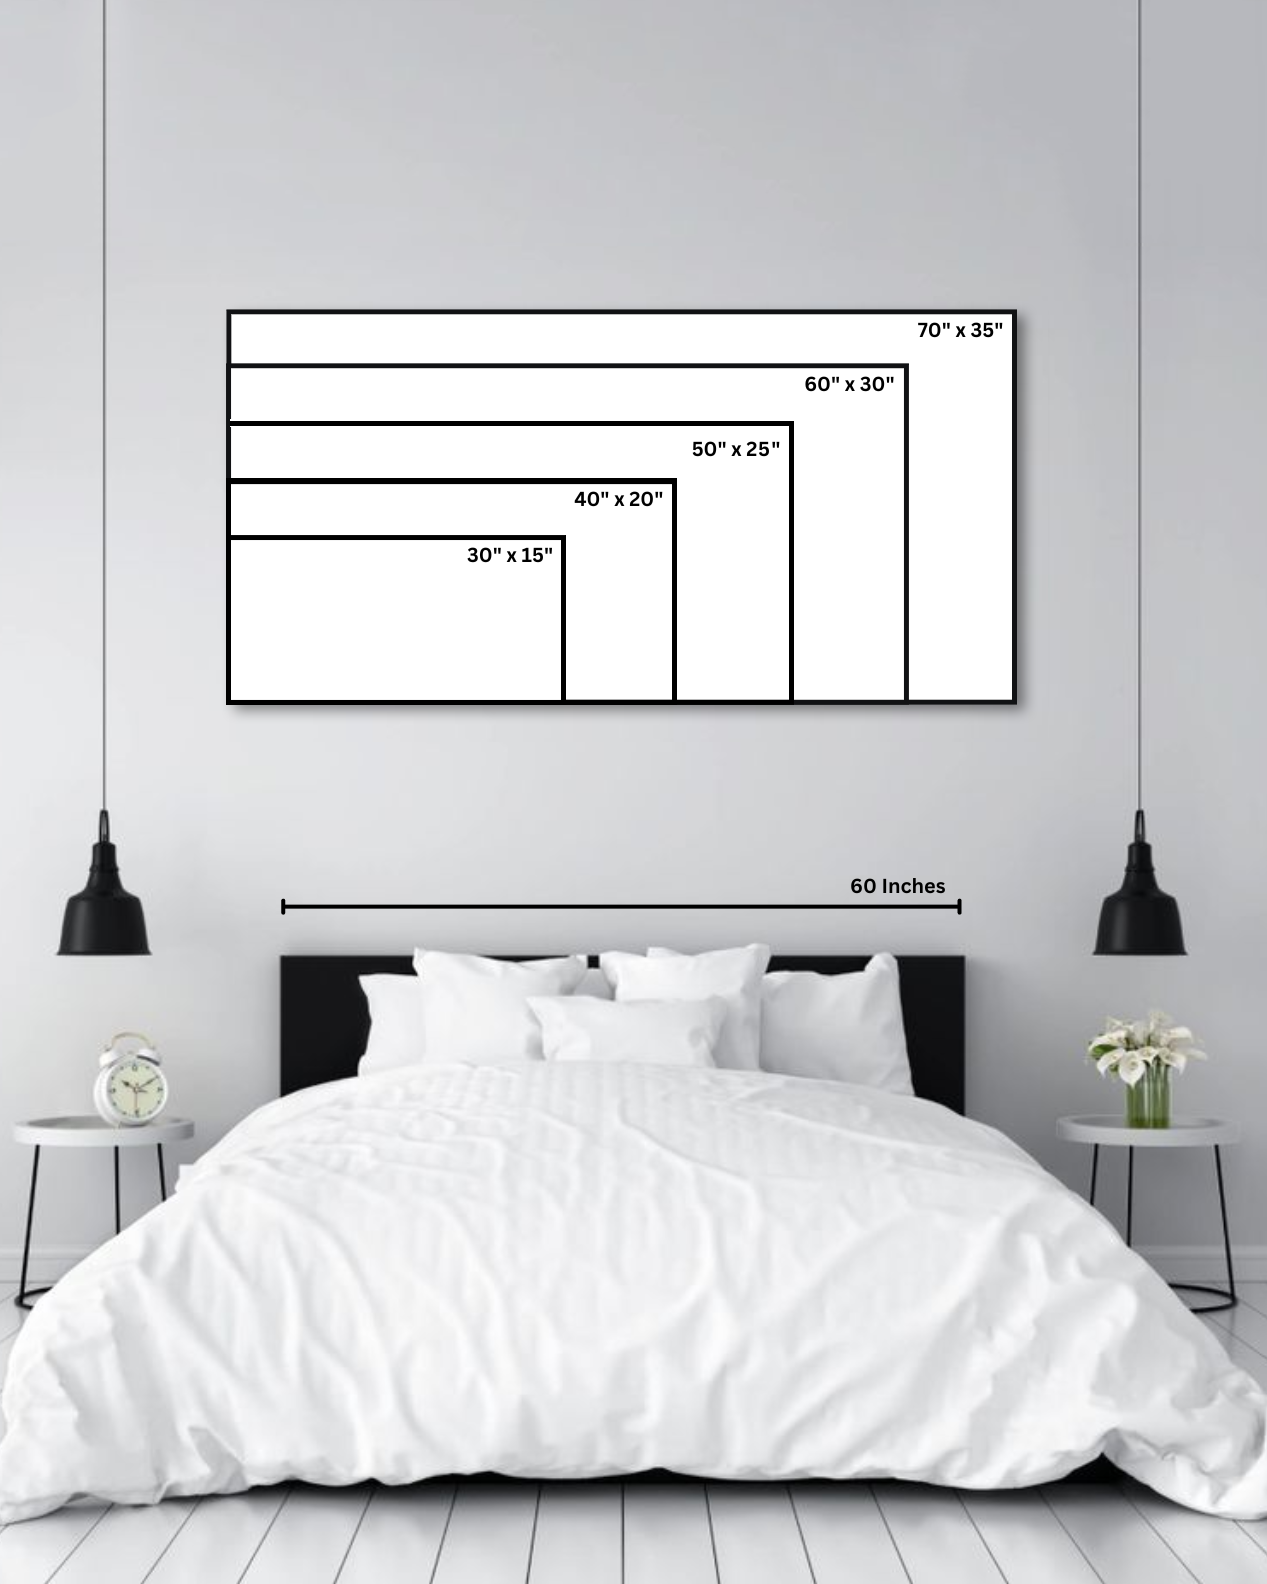 Example of a photo hanging on a wall to help visualize different sizes.